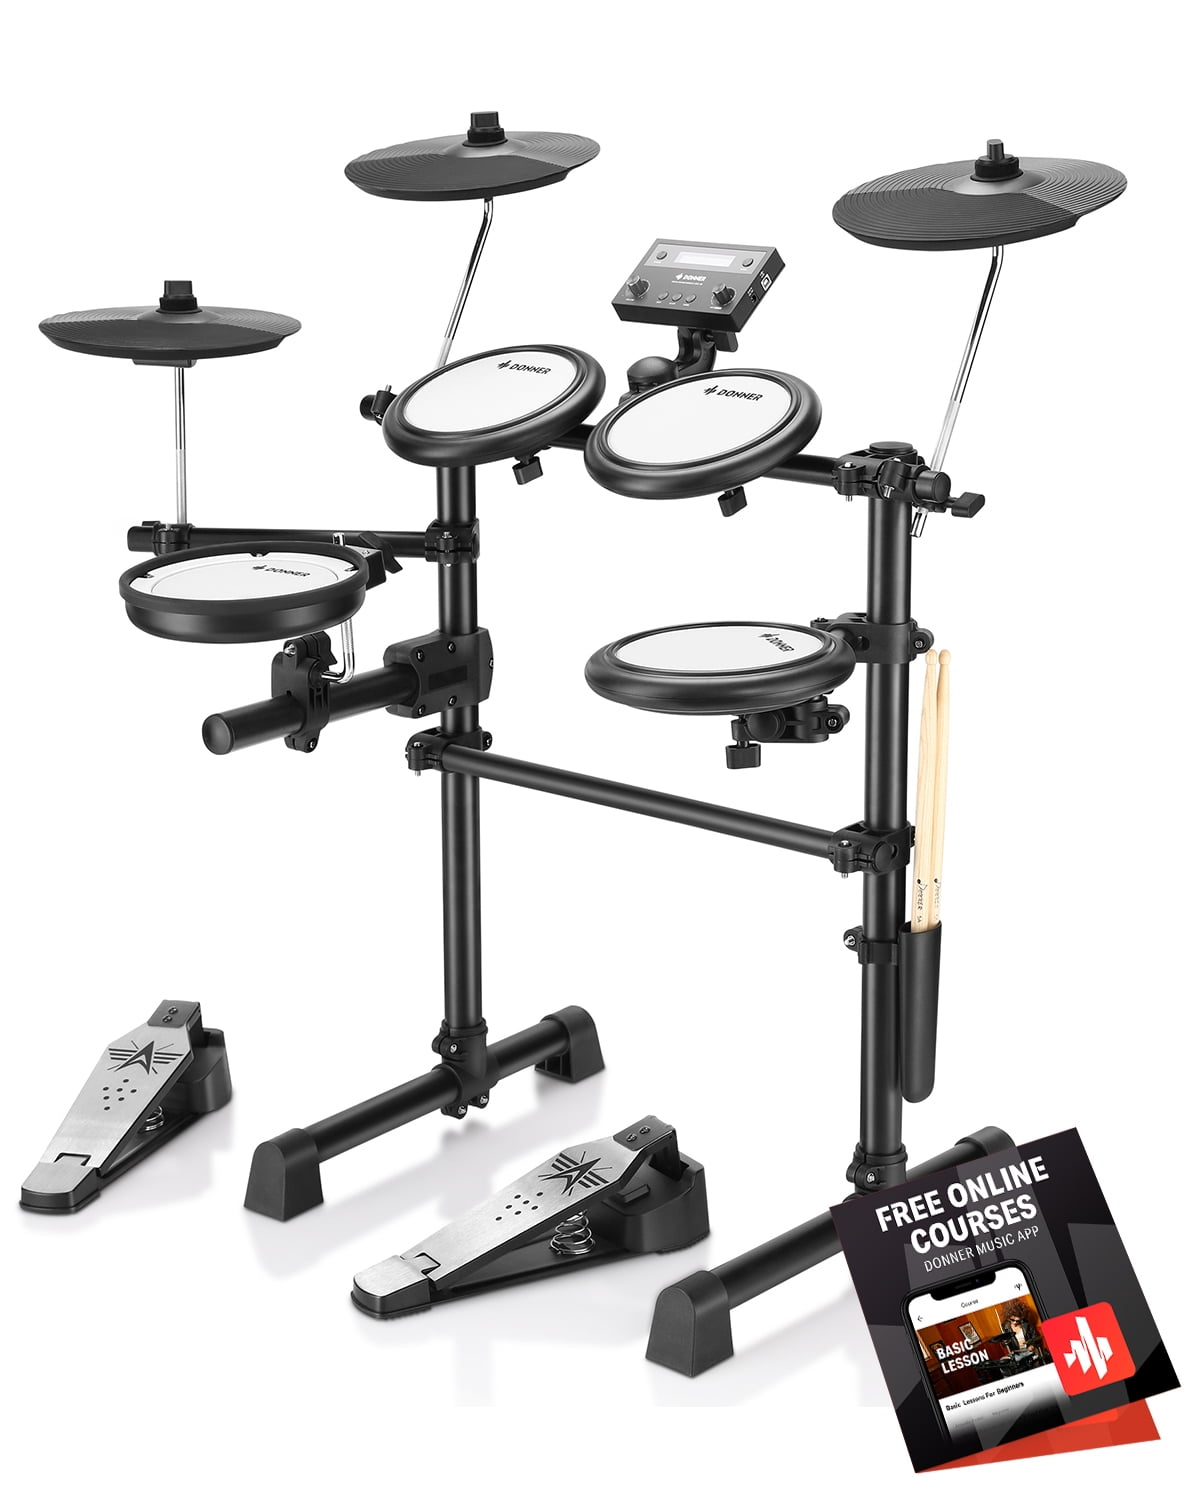 Donner Electric Drum Set,272 Sounds and Free Teaching Courses for Beginner  with Quiet Mesh Drum Set Heavy Duty Pedals, Drum Sticks Easy Storage, Light  & Portable DED-90 - Walmart.com